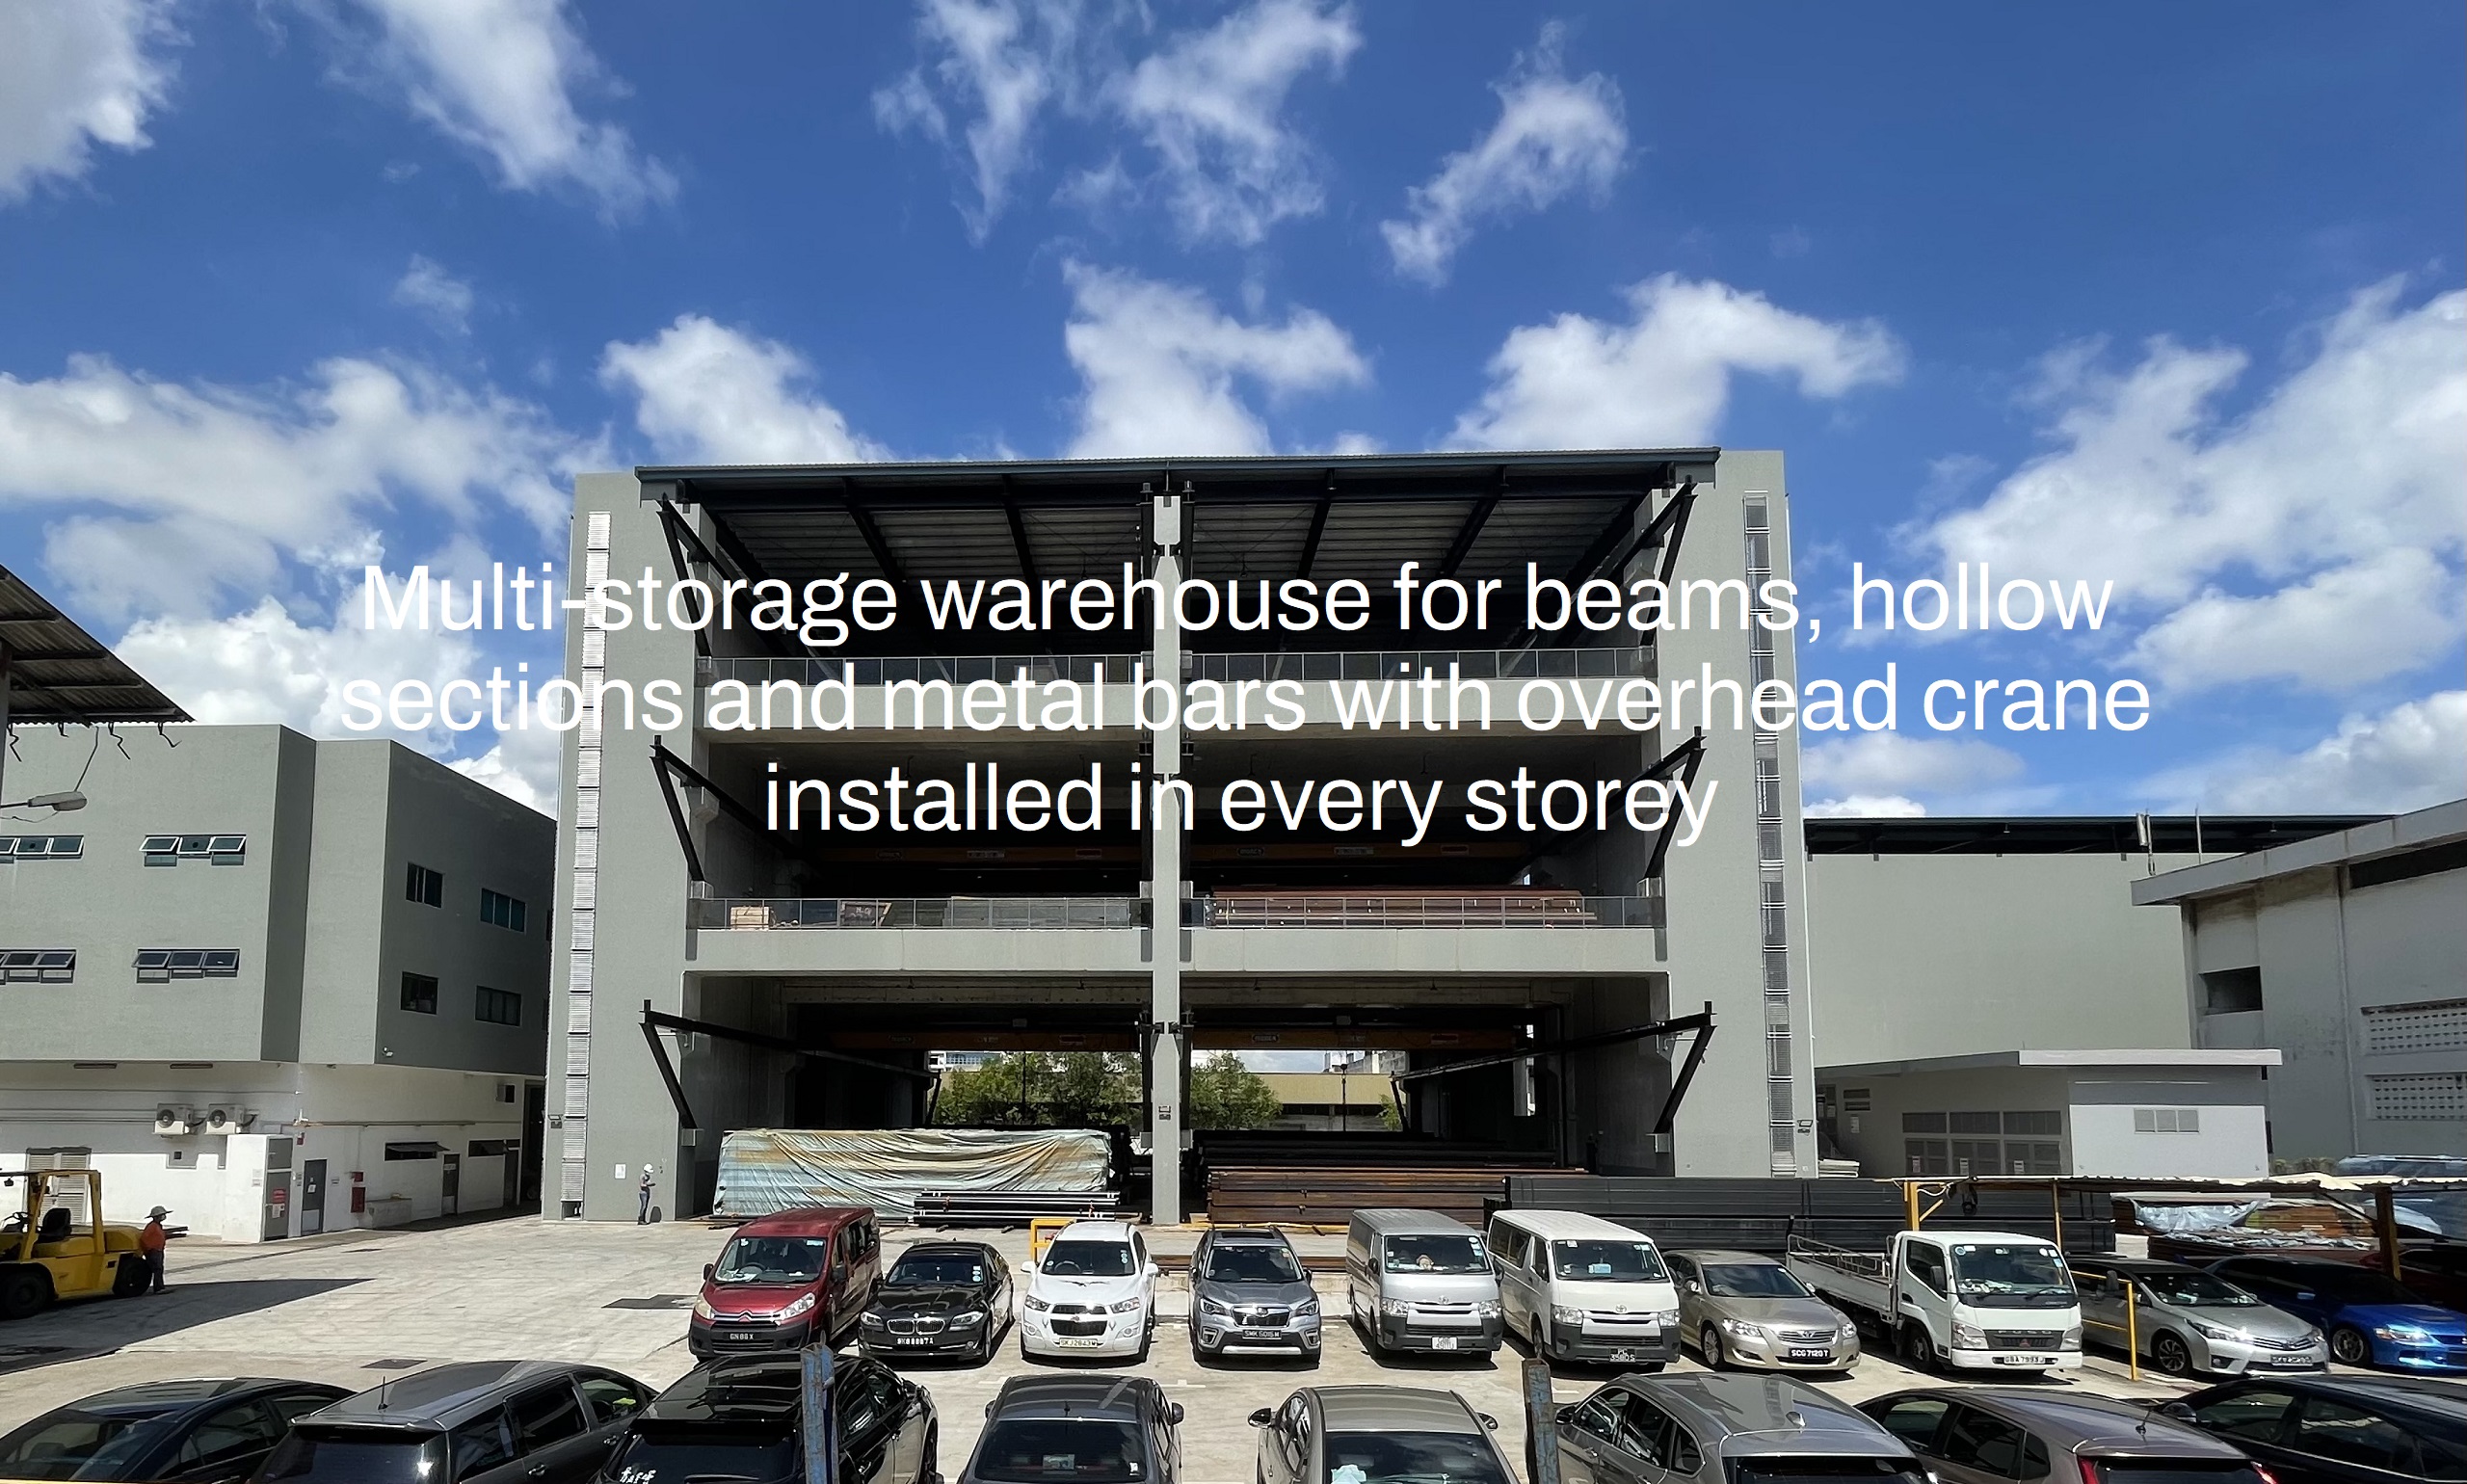 Multi-storage warehouse for beams, hollow sections and metal bars with overhead crane installed in every storey